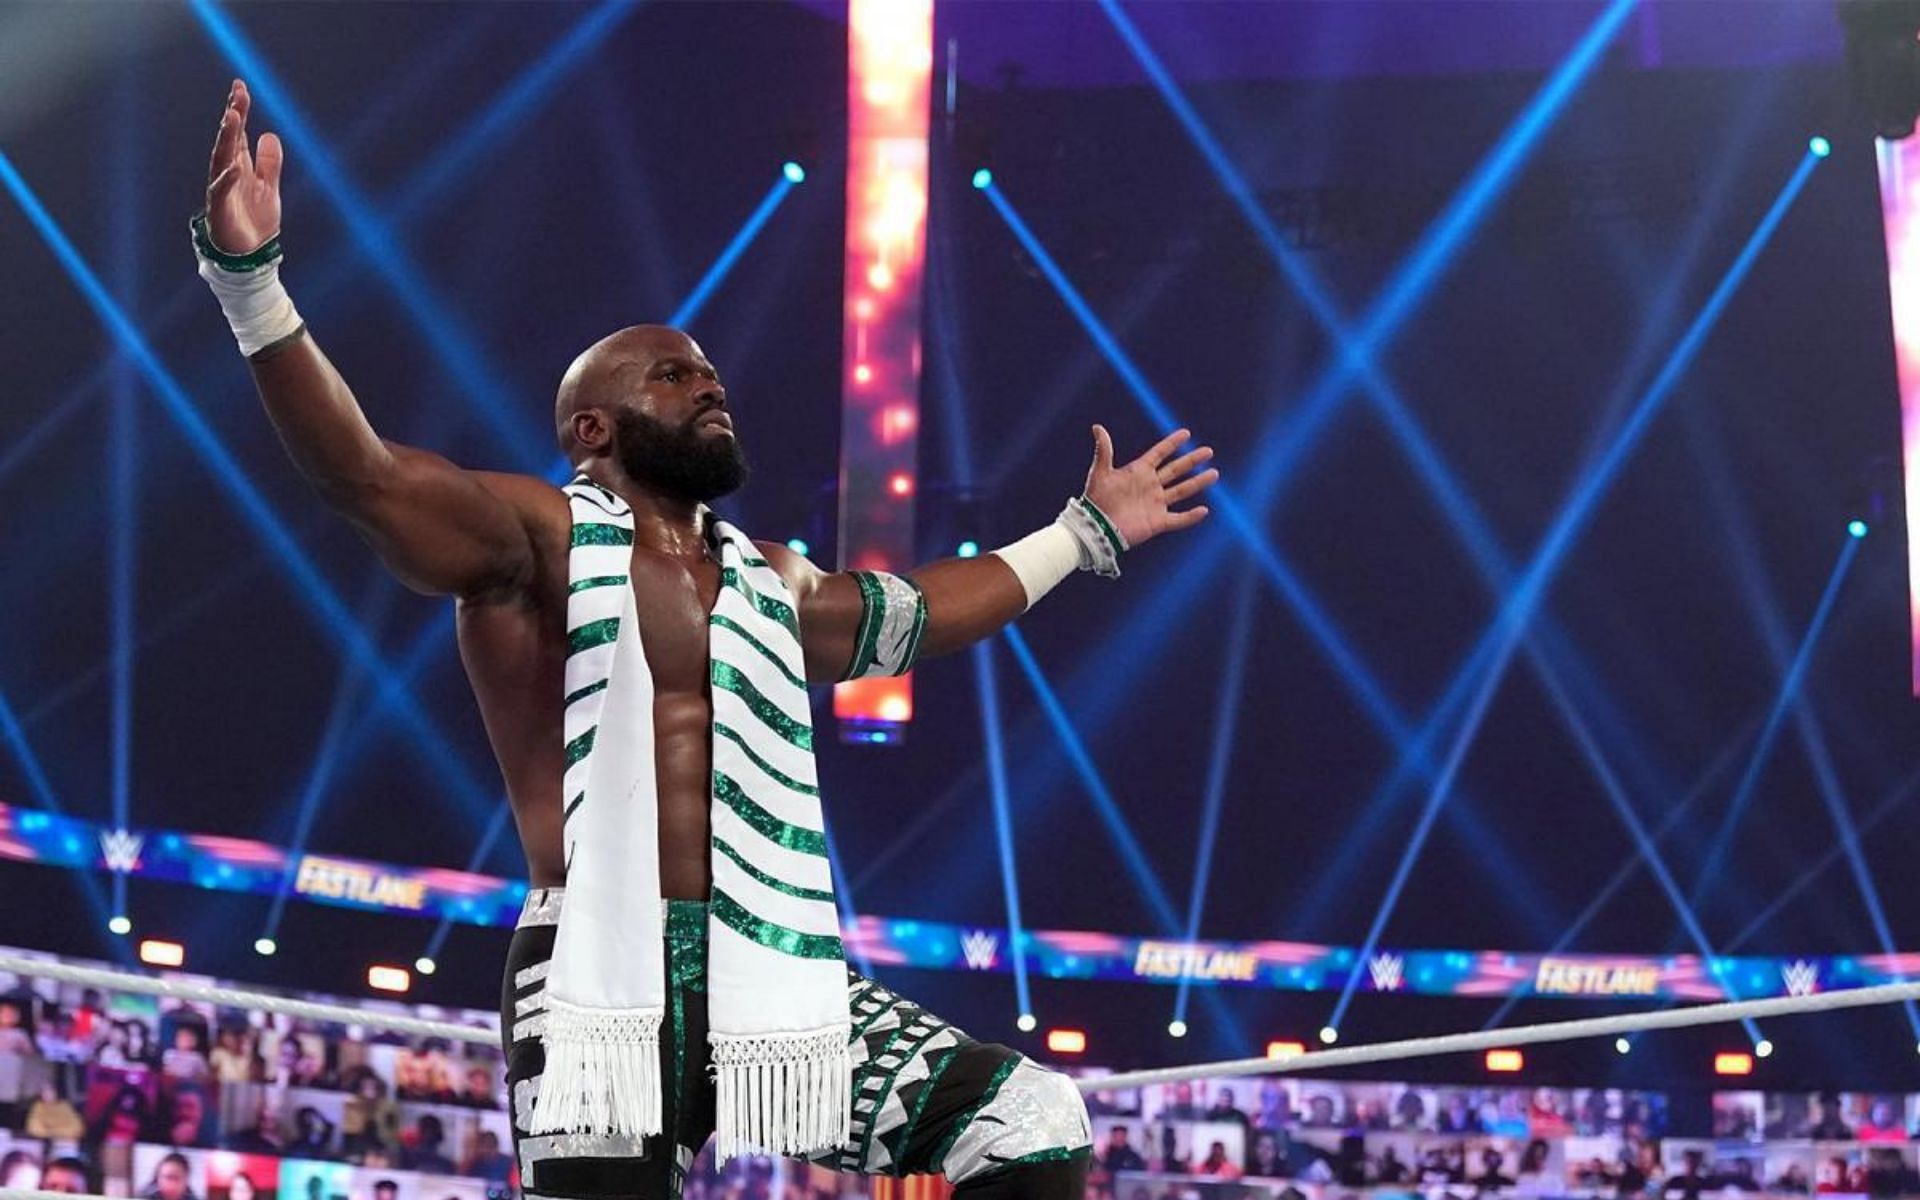 Apollo Crews following his match for the Intercontinental Championship